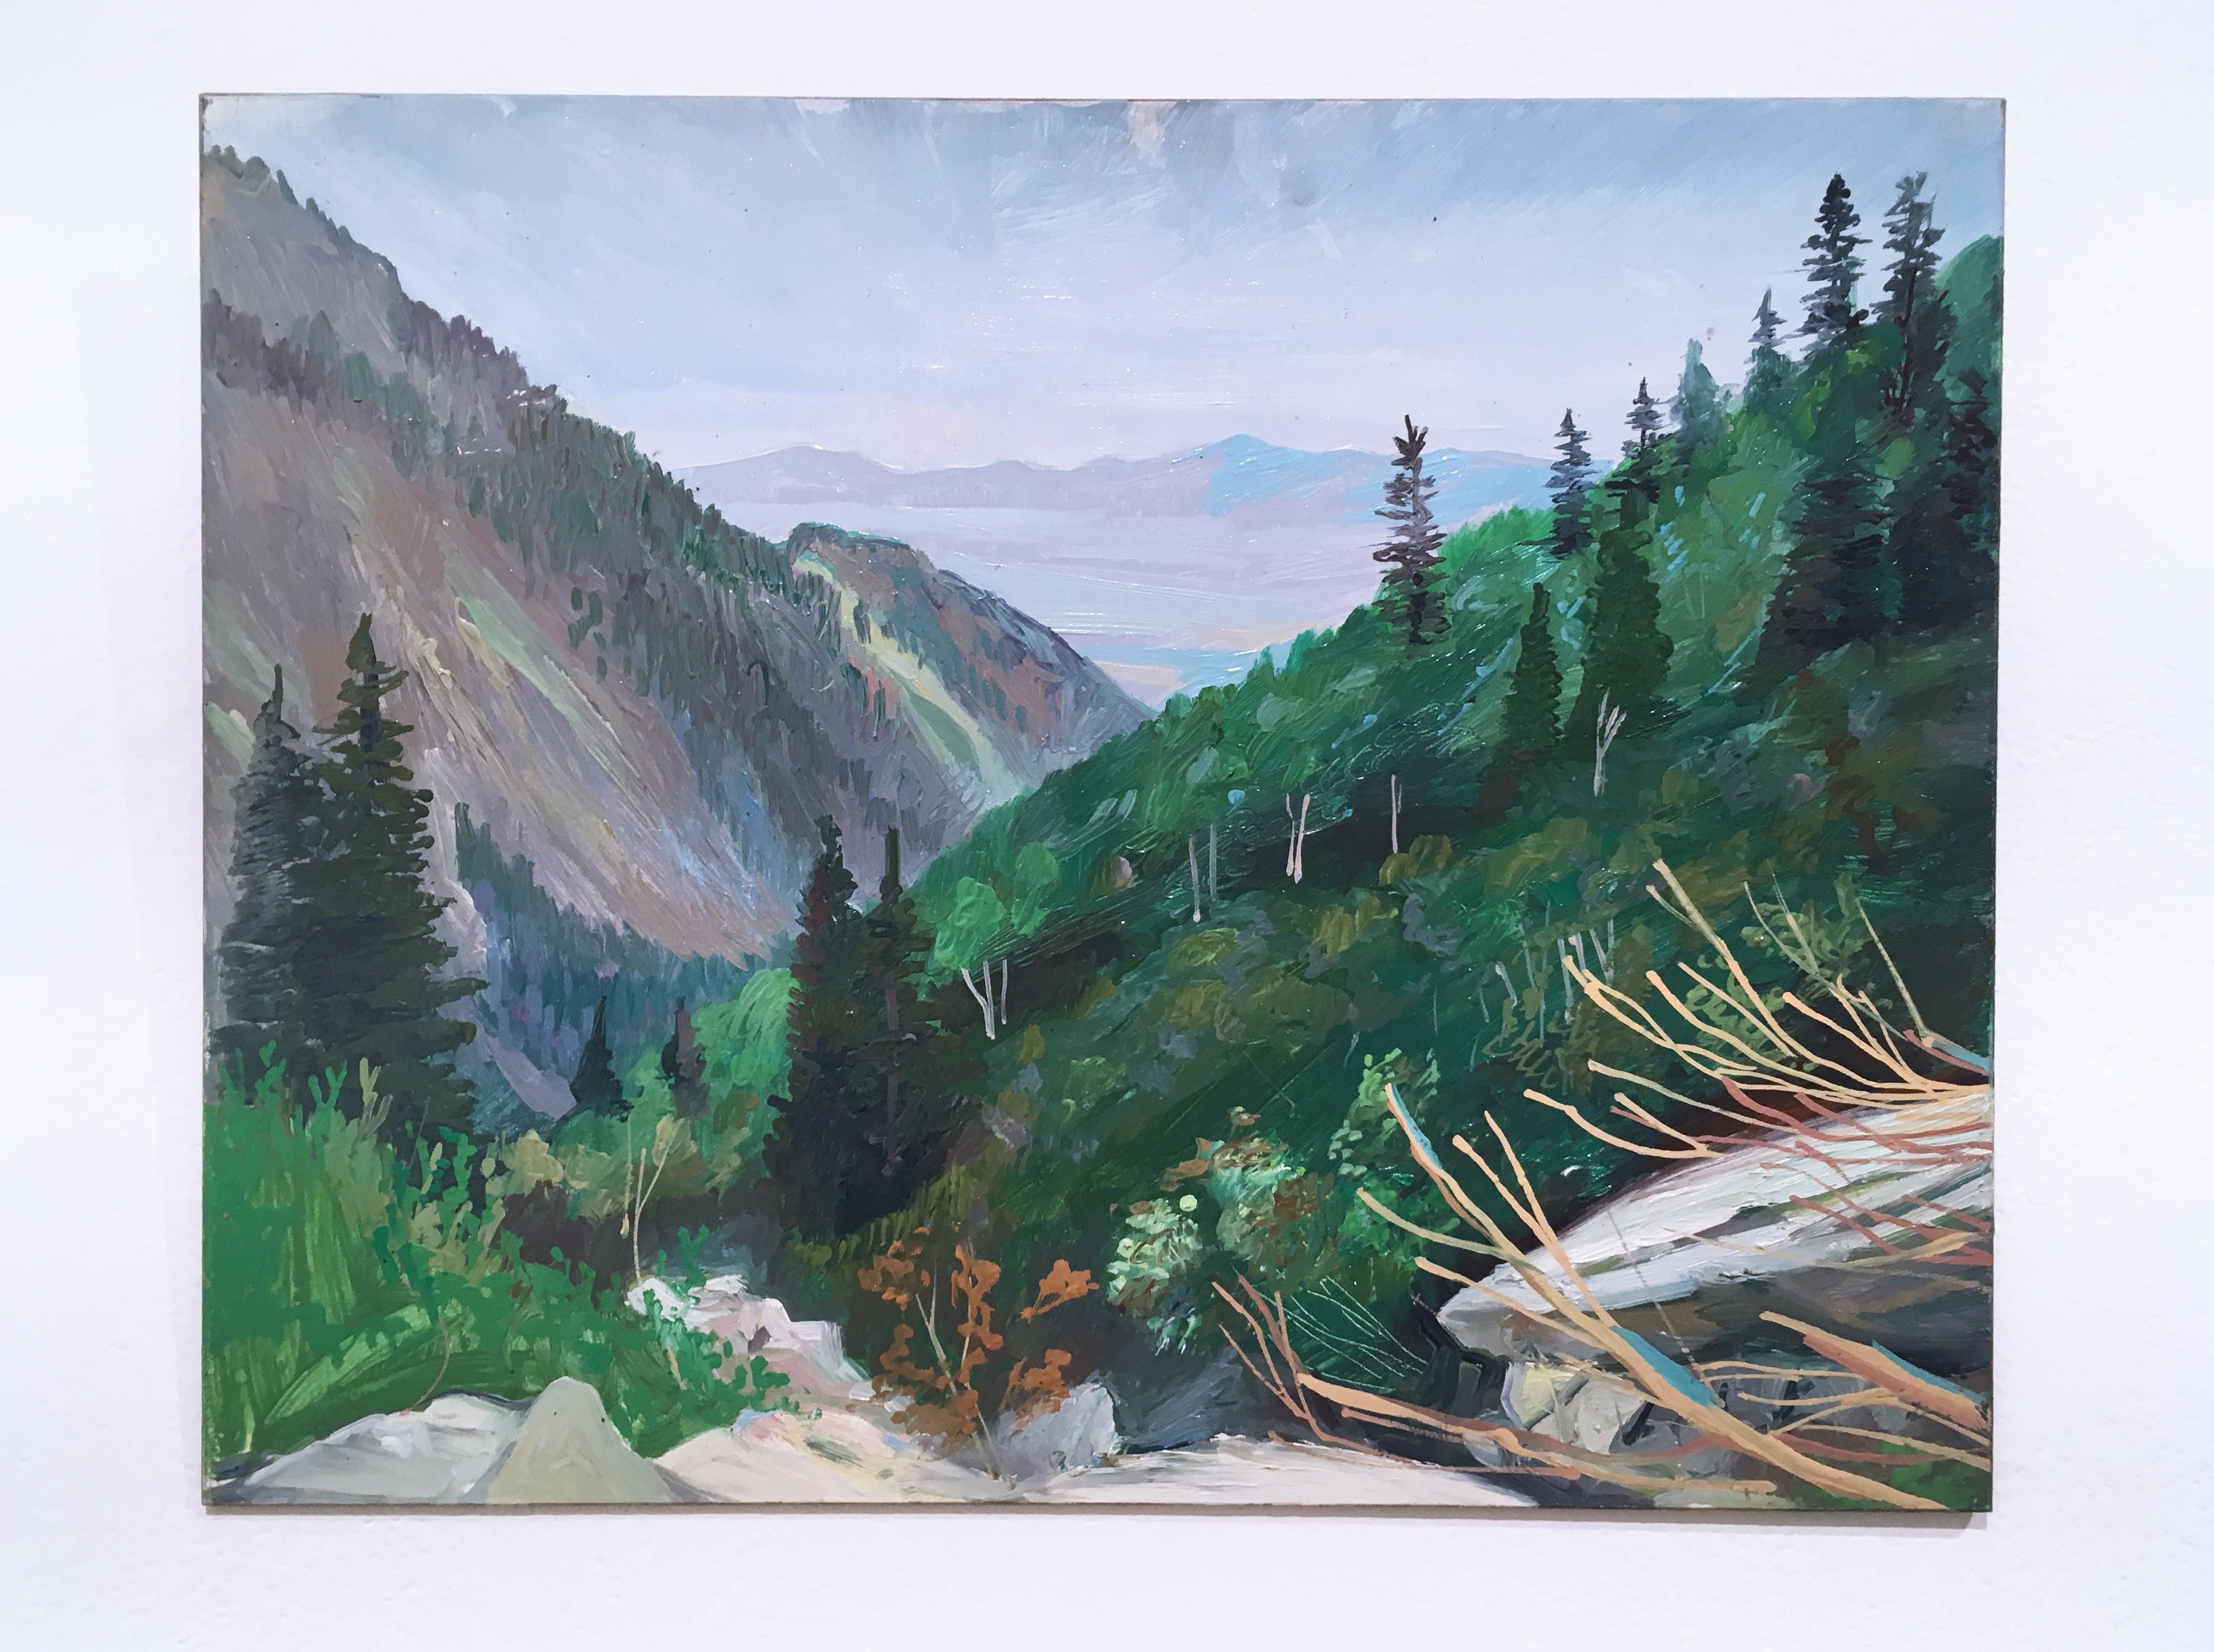 South View of SLC, plein air figurative, landscape, oil on panel, 2015 - Painting by Thomas John Carlson